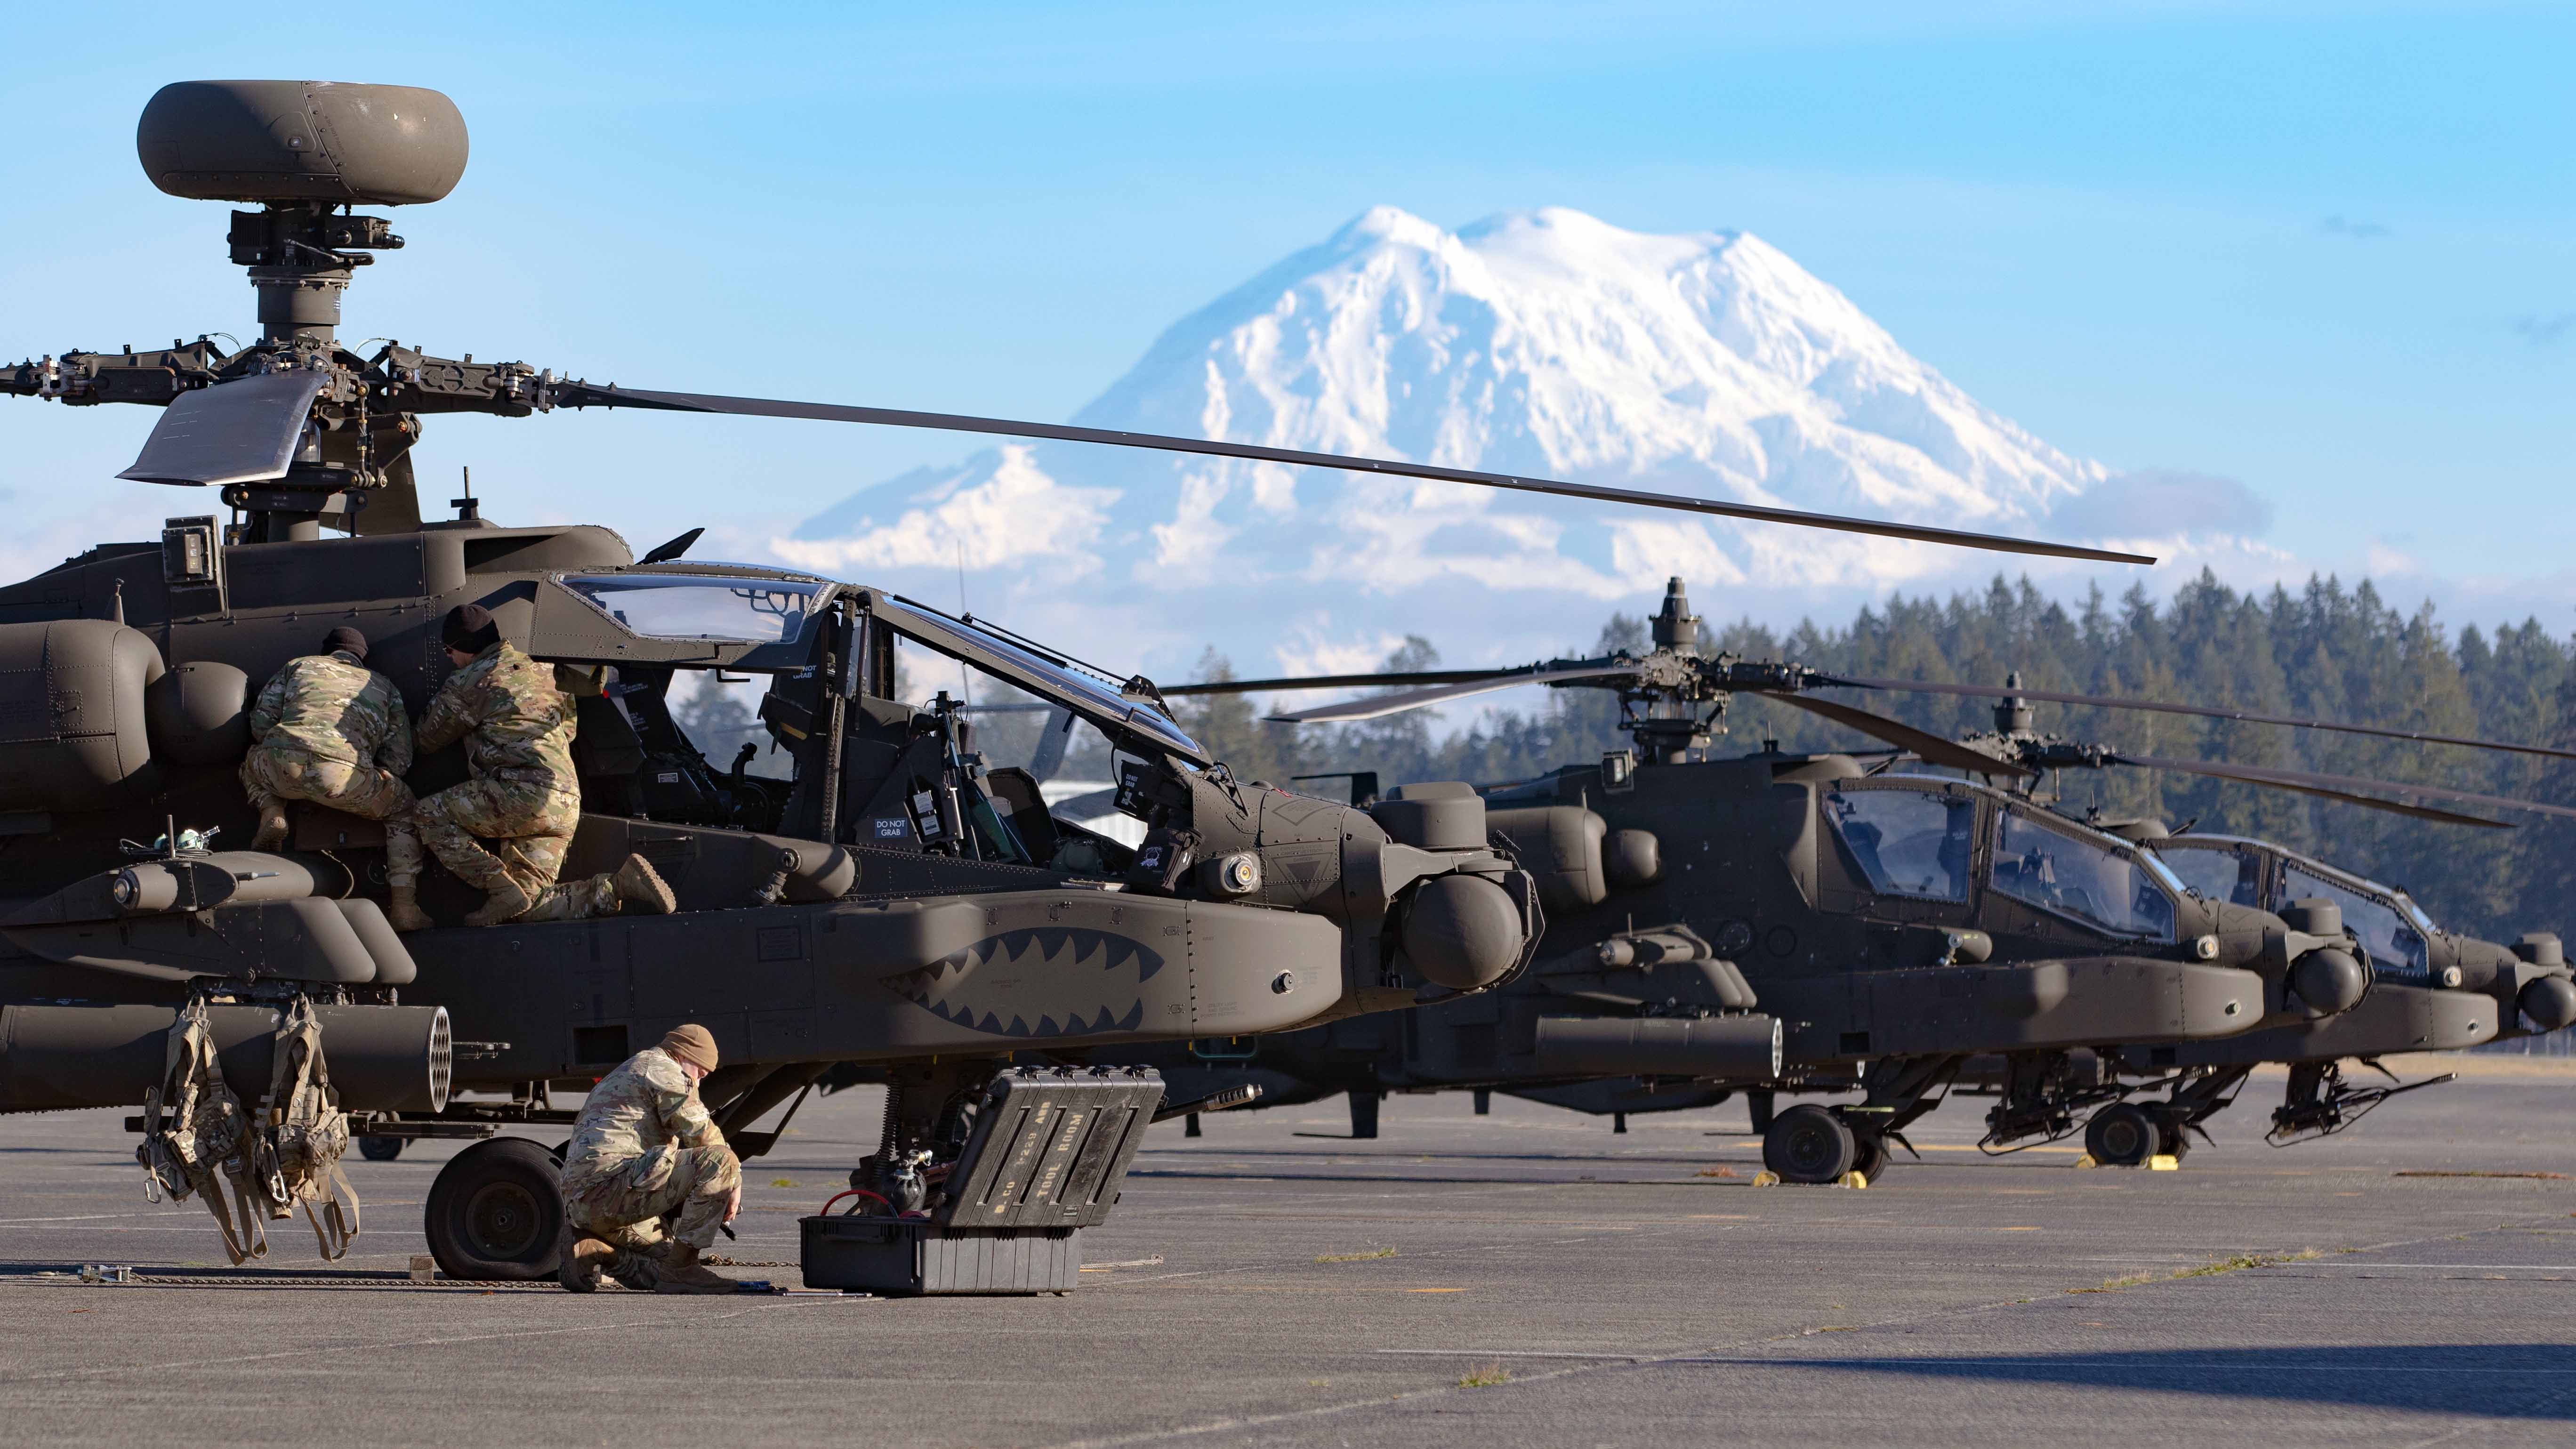 Soldiers assigned to 16th Combat Aviation Brigade perform maintenance on an AH-64E Apache attack helicopter at Joint Base Lewis-McChord, Wash. on Nov. 8, 2022. Mount Rainier is visible in the background. (U.S. Army photo by Capt. Kyle Abraham, 16th Combat Aviation Brigade)